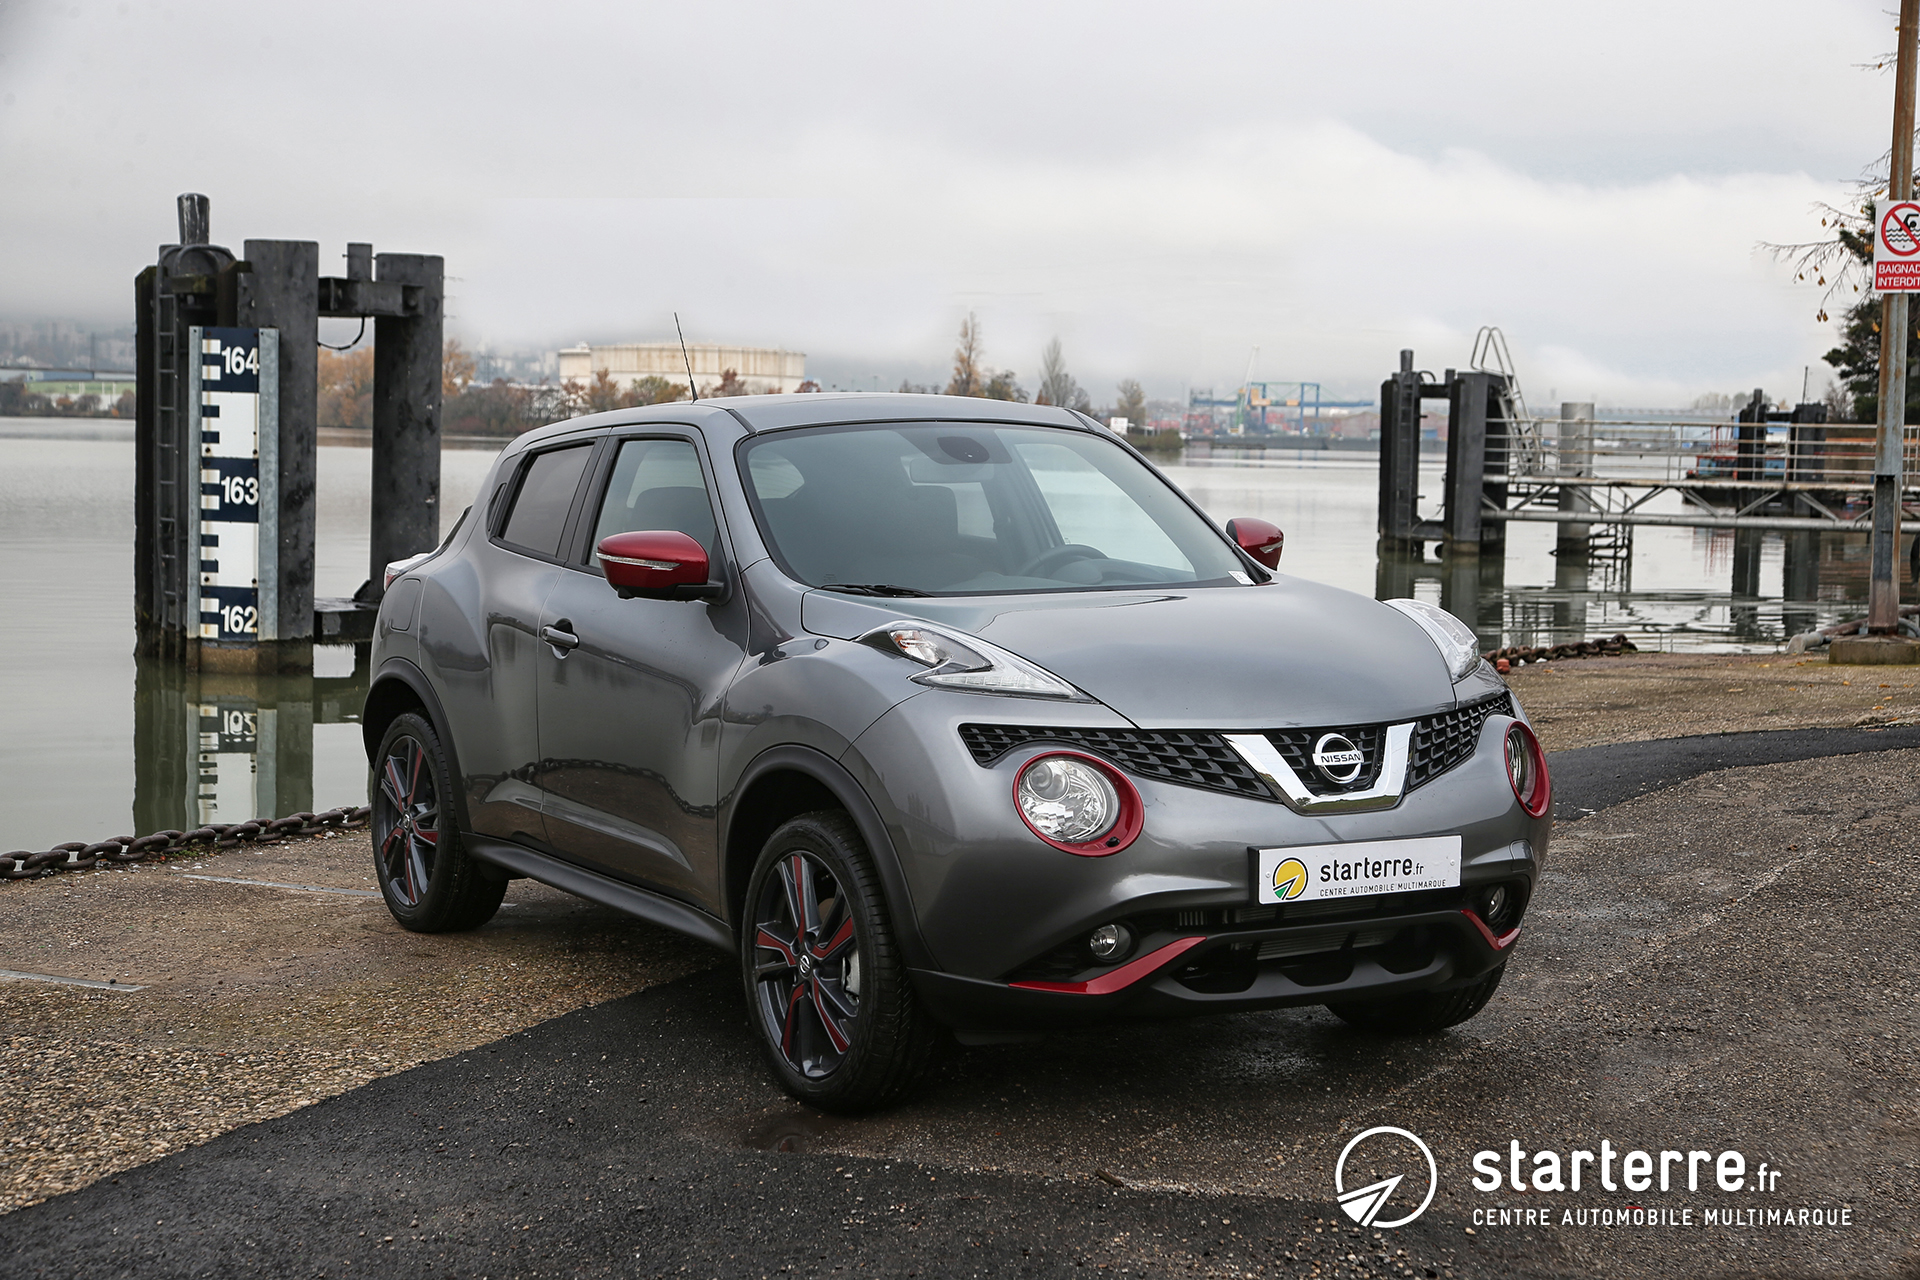 Nissan Juke dimensions, boot space and electrification, nissan juke 